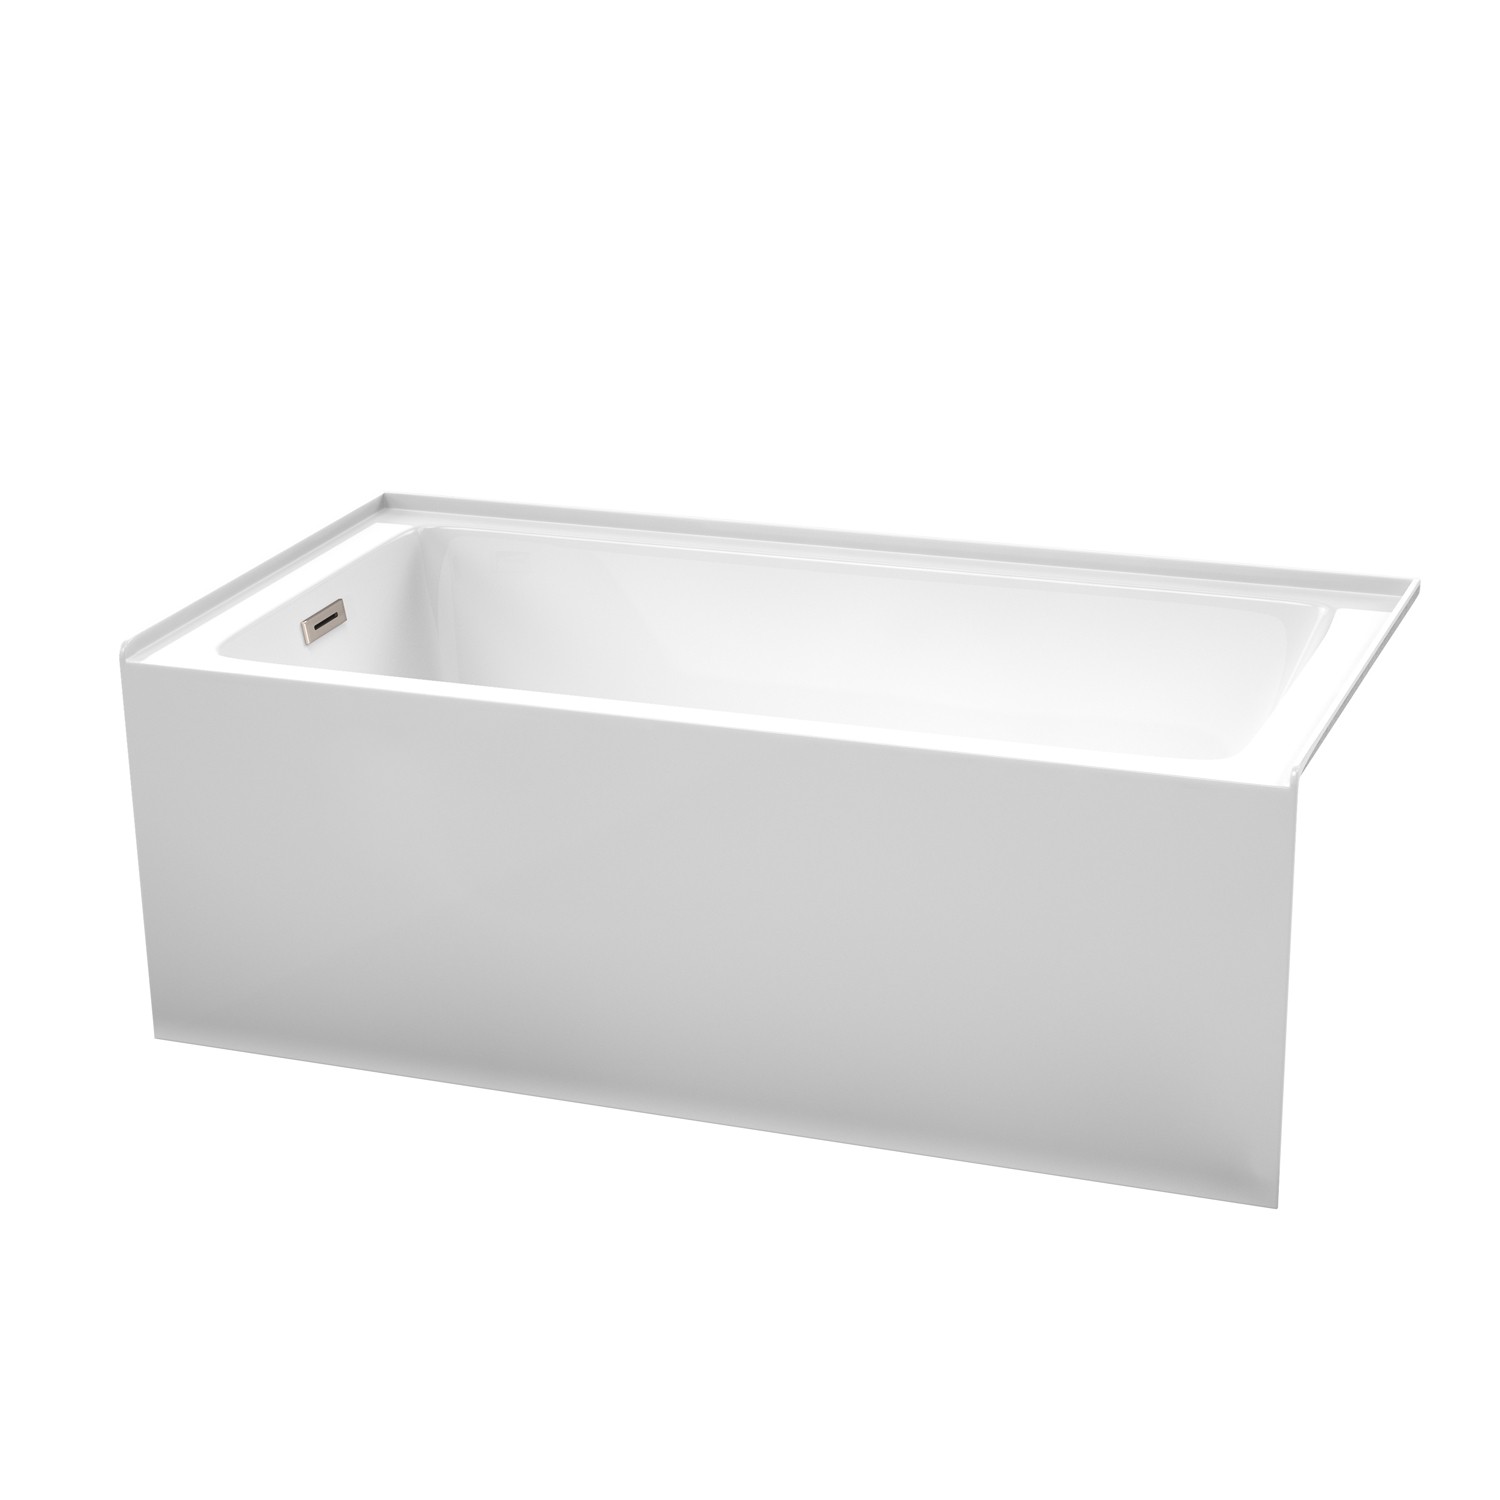 WYNDHAM COLLECTION WCBTW16030LBNTRIM GRAYLEY 60 INCH ALCOVE BATHTUB IN WHITE WITH LEFT-HAND DRAIN AND OVERFLOW TRIM IN BRUSHED NICKEL